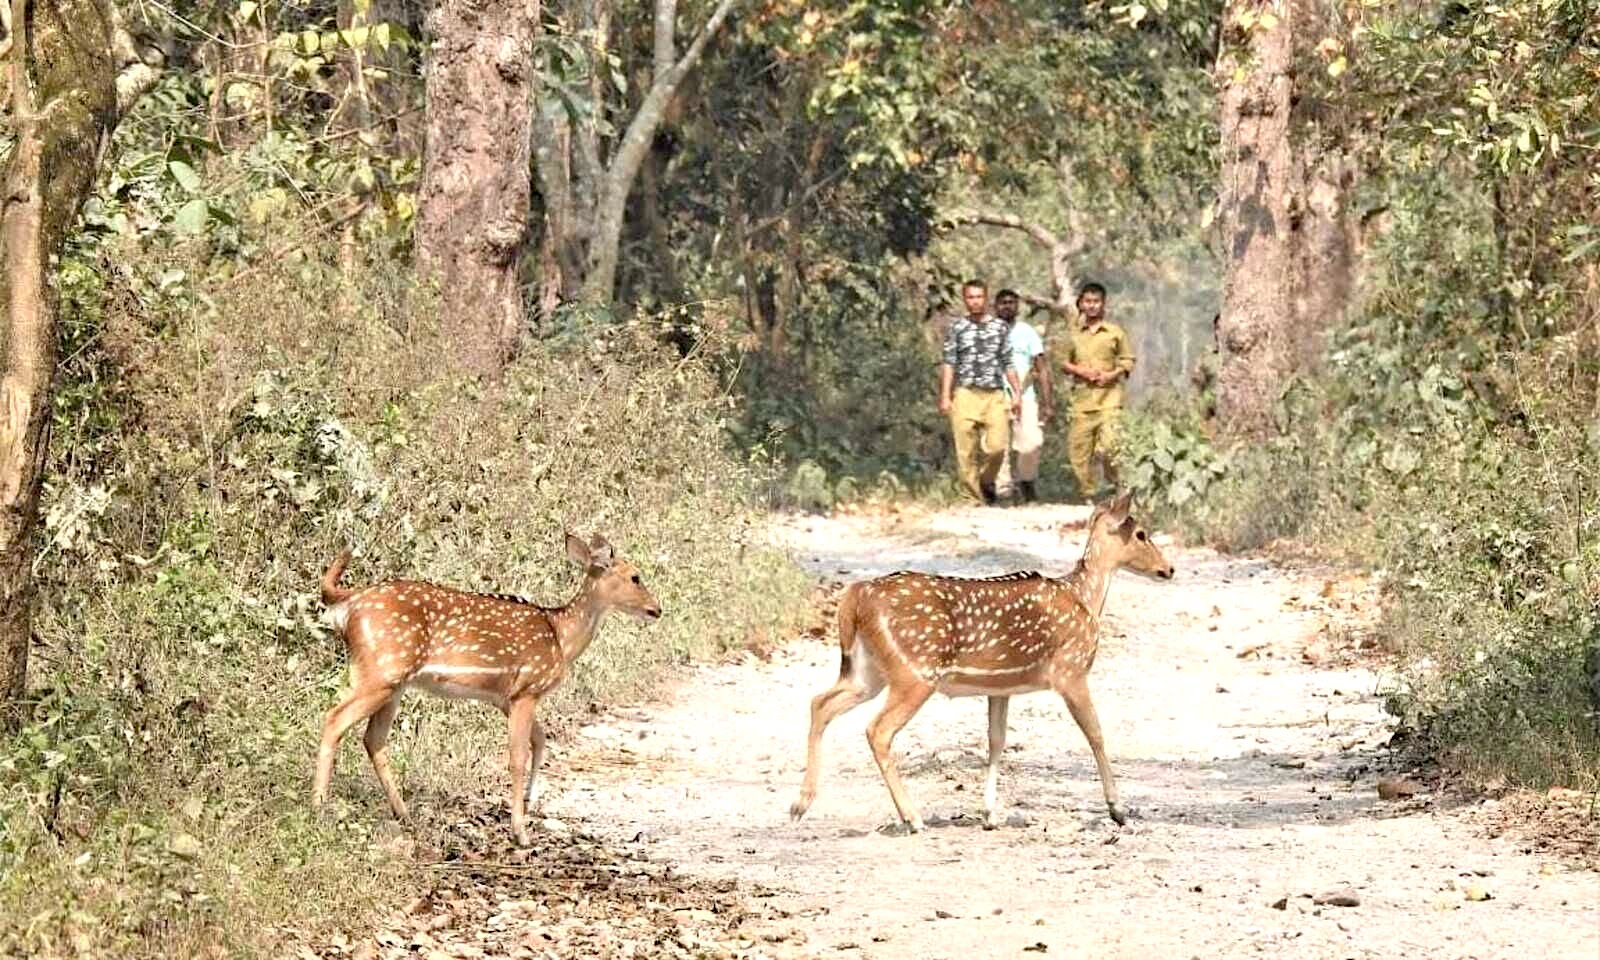 A pair of spotted deer cross a road inside the Raimona National Park. Photo: Nayan j Nath, CC BY-SA 4.0 